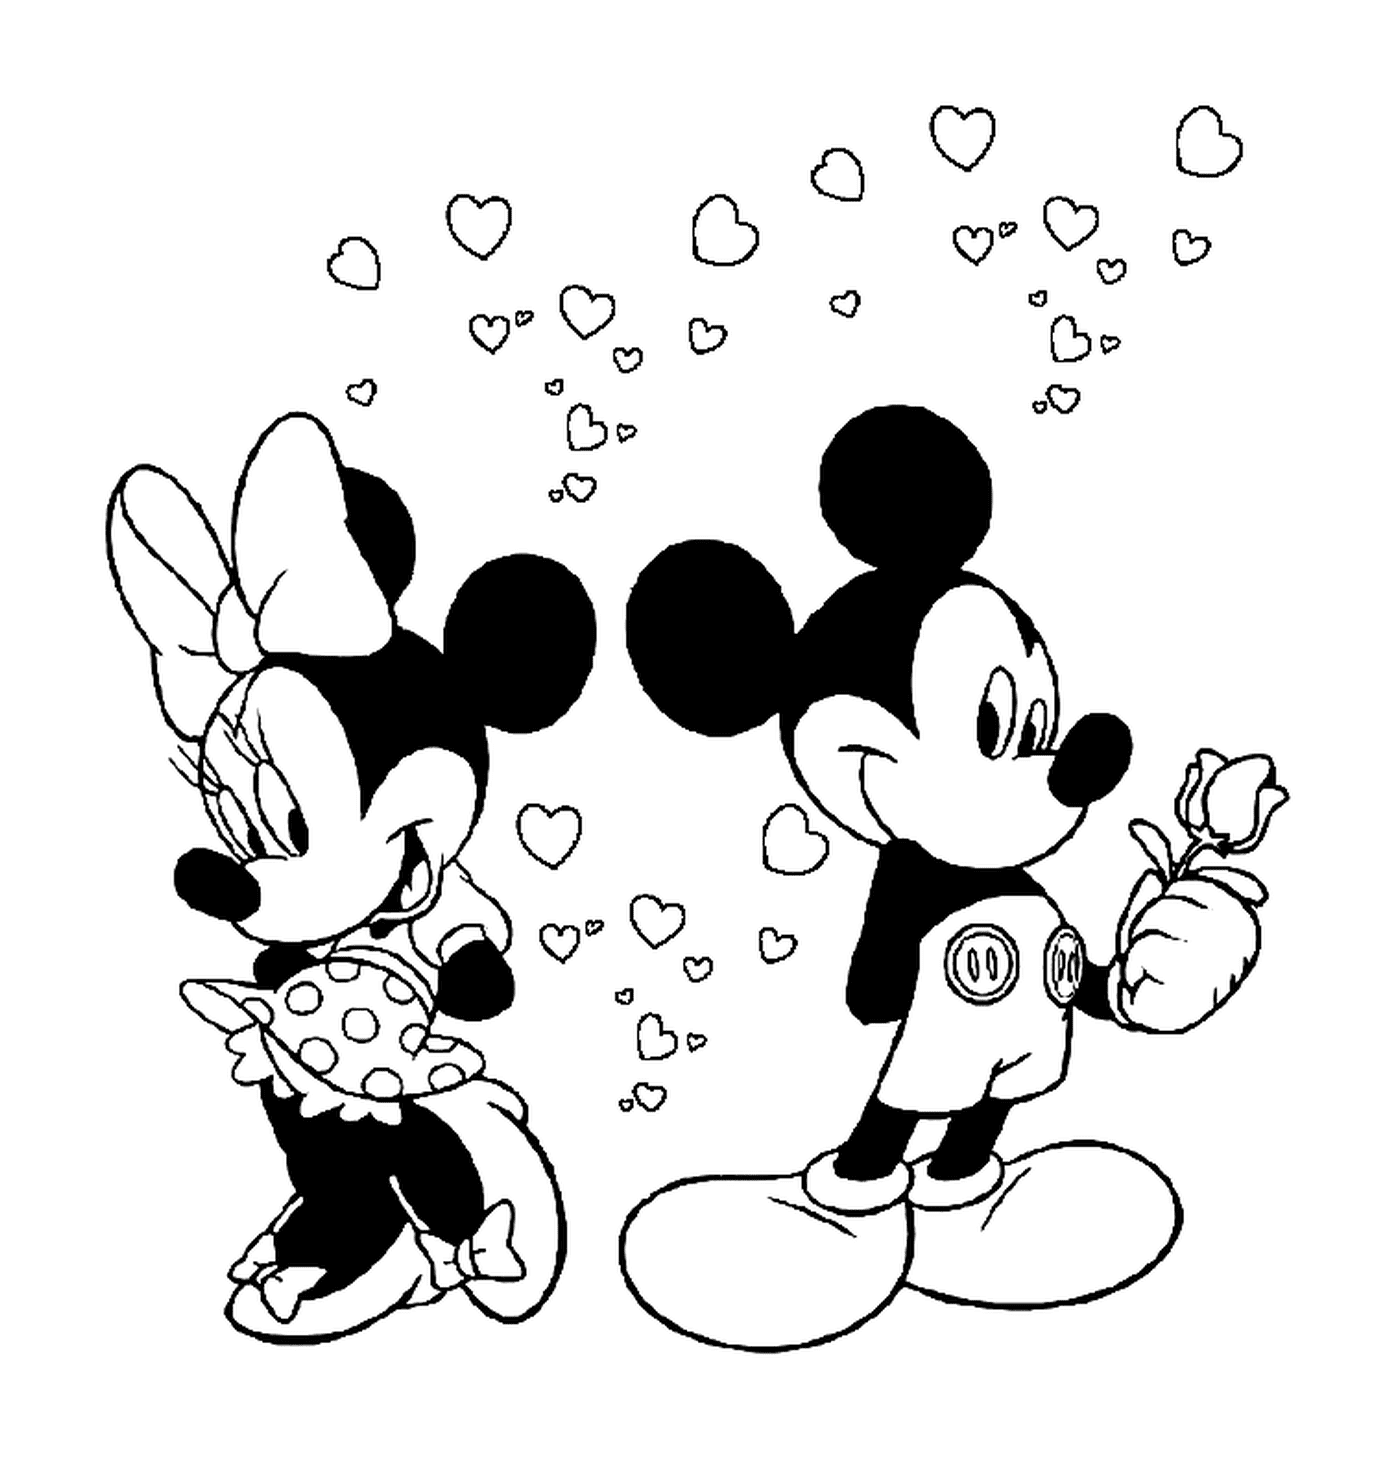  Mickey Mouse is in love with Minnie Mouse 